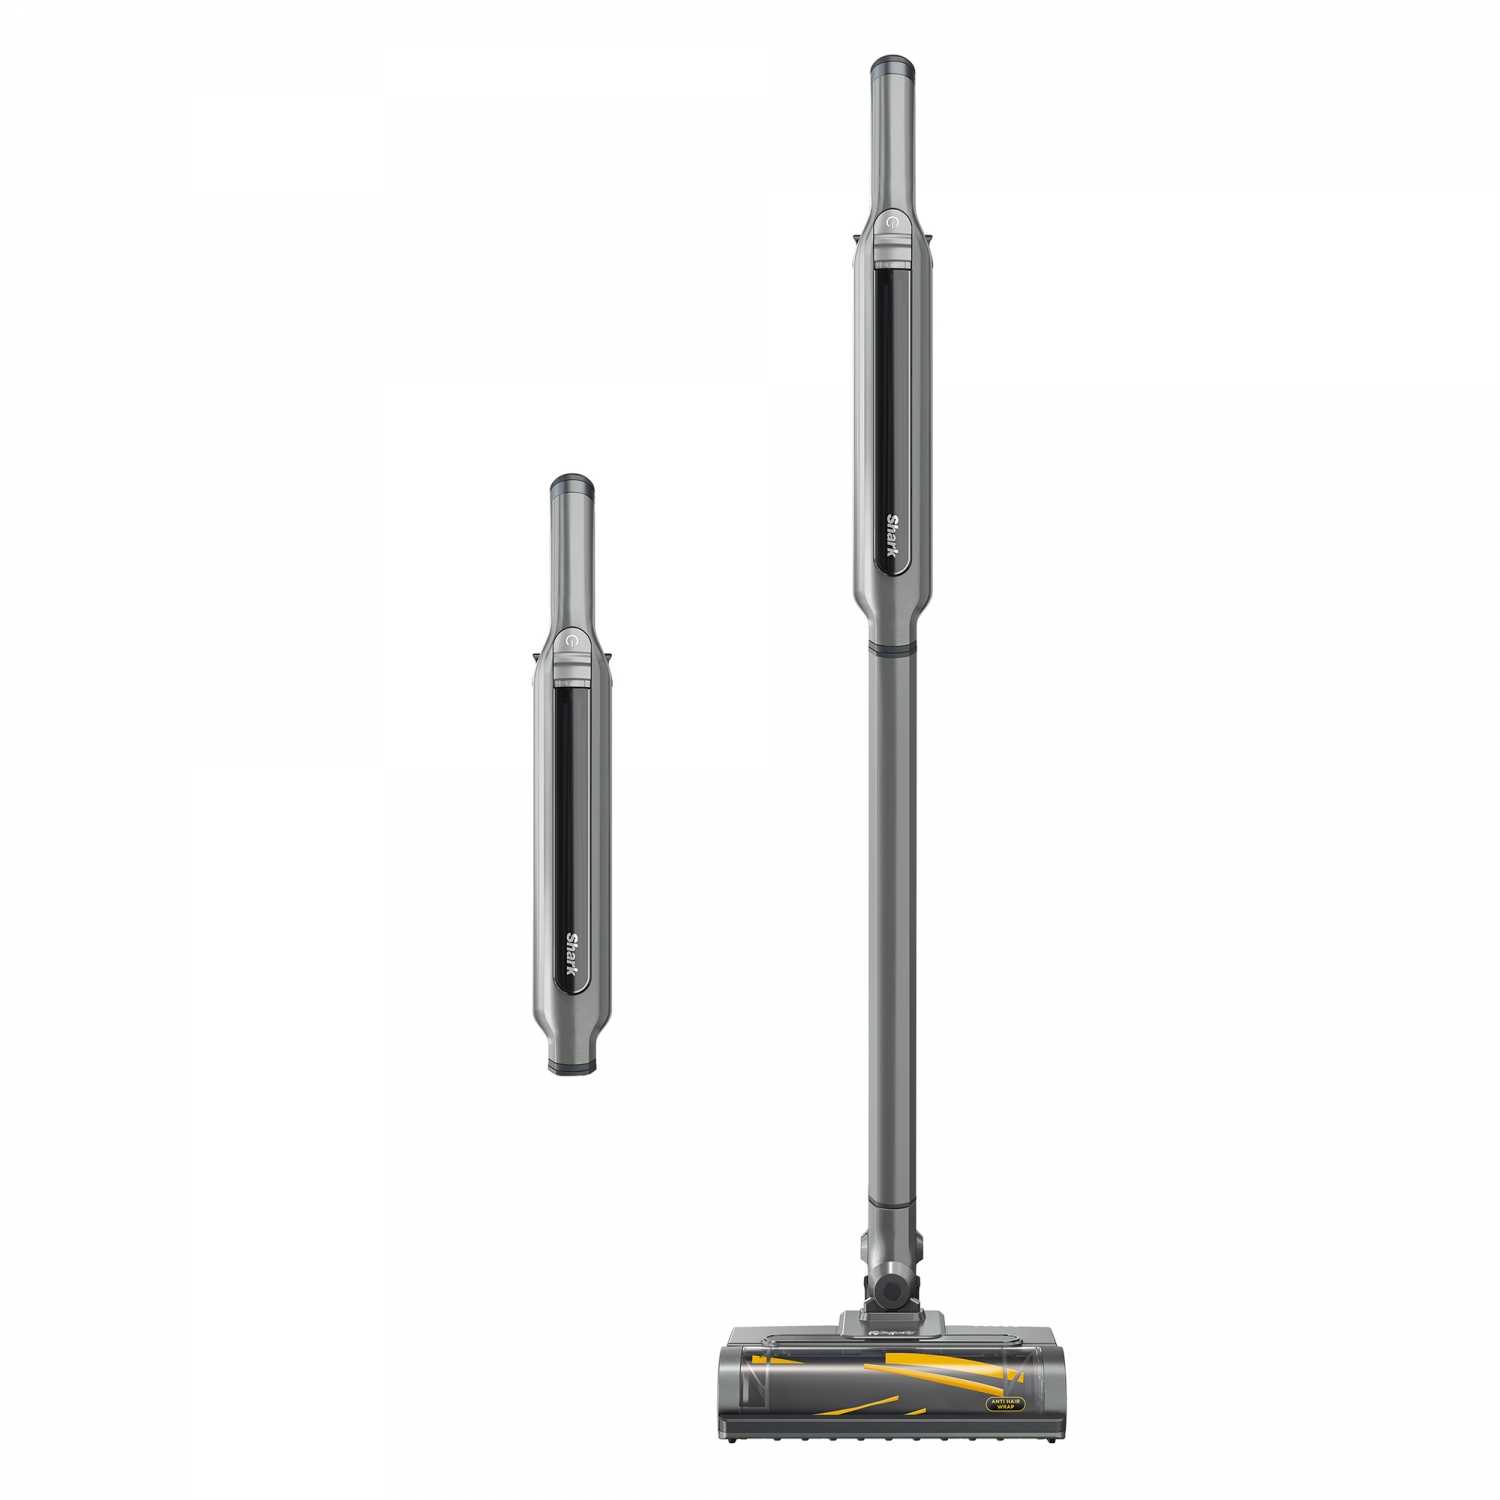 Shark WV361UK Cordless Vacuum Cleaner with Anti Hair Wrap Technology - Run Time 16 Mintues - Steel Grey - 0